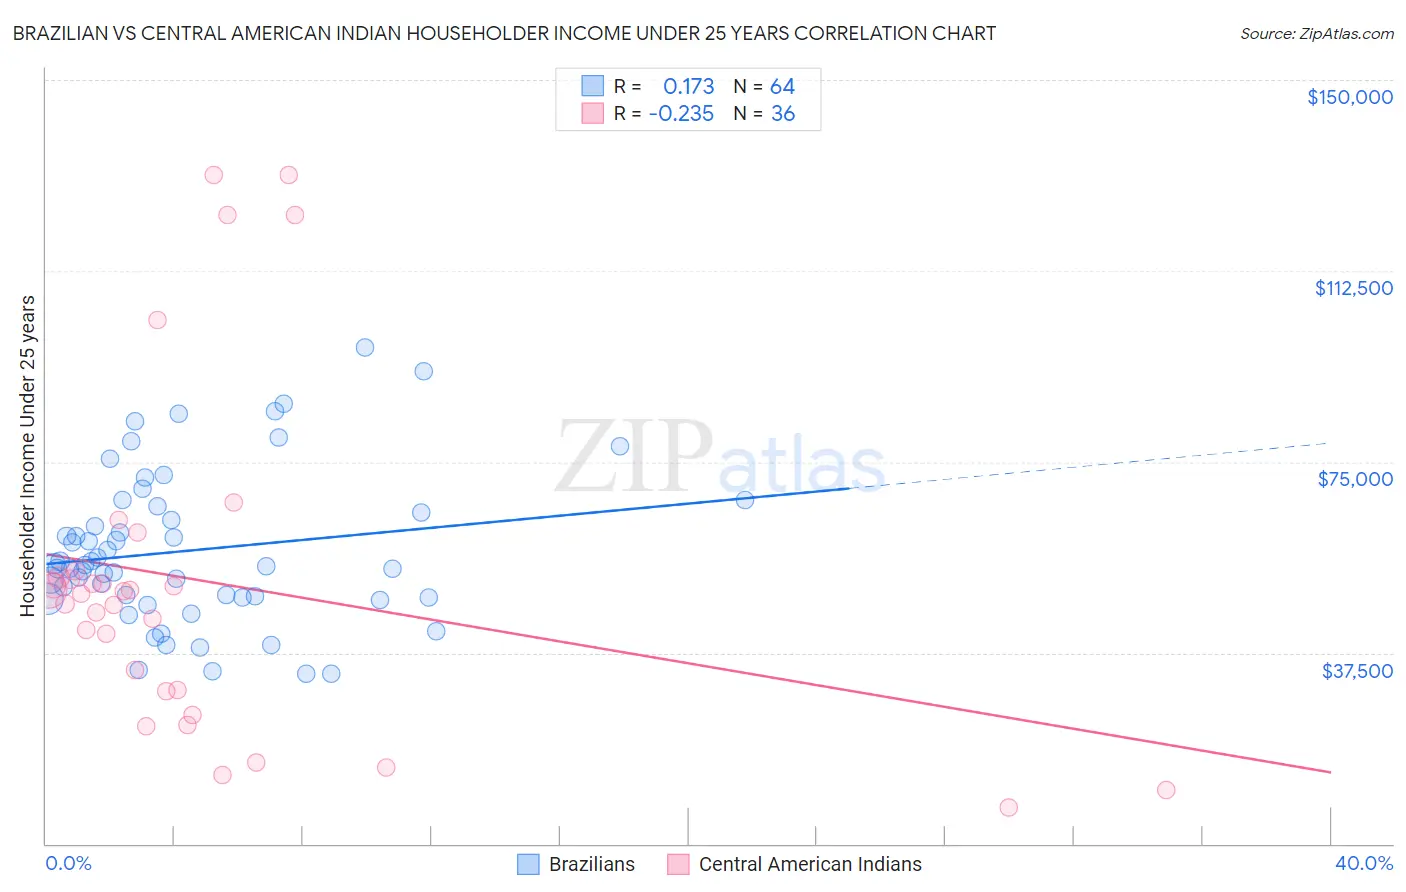 Brazilian vs Central American Indian Householder Income Under 25 years